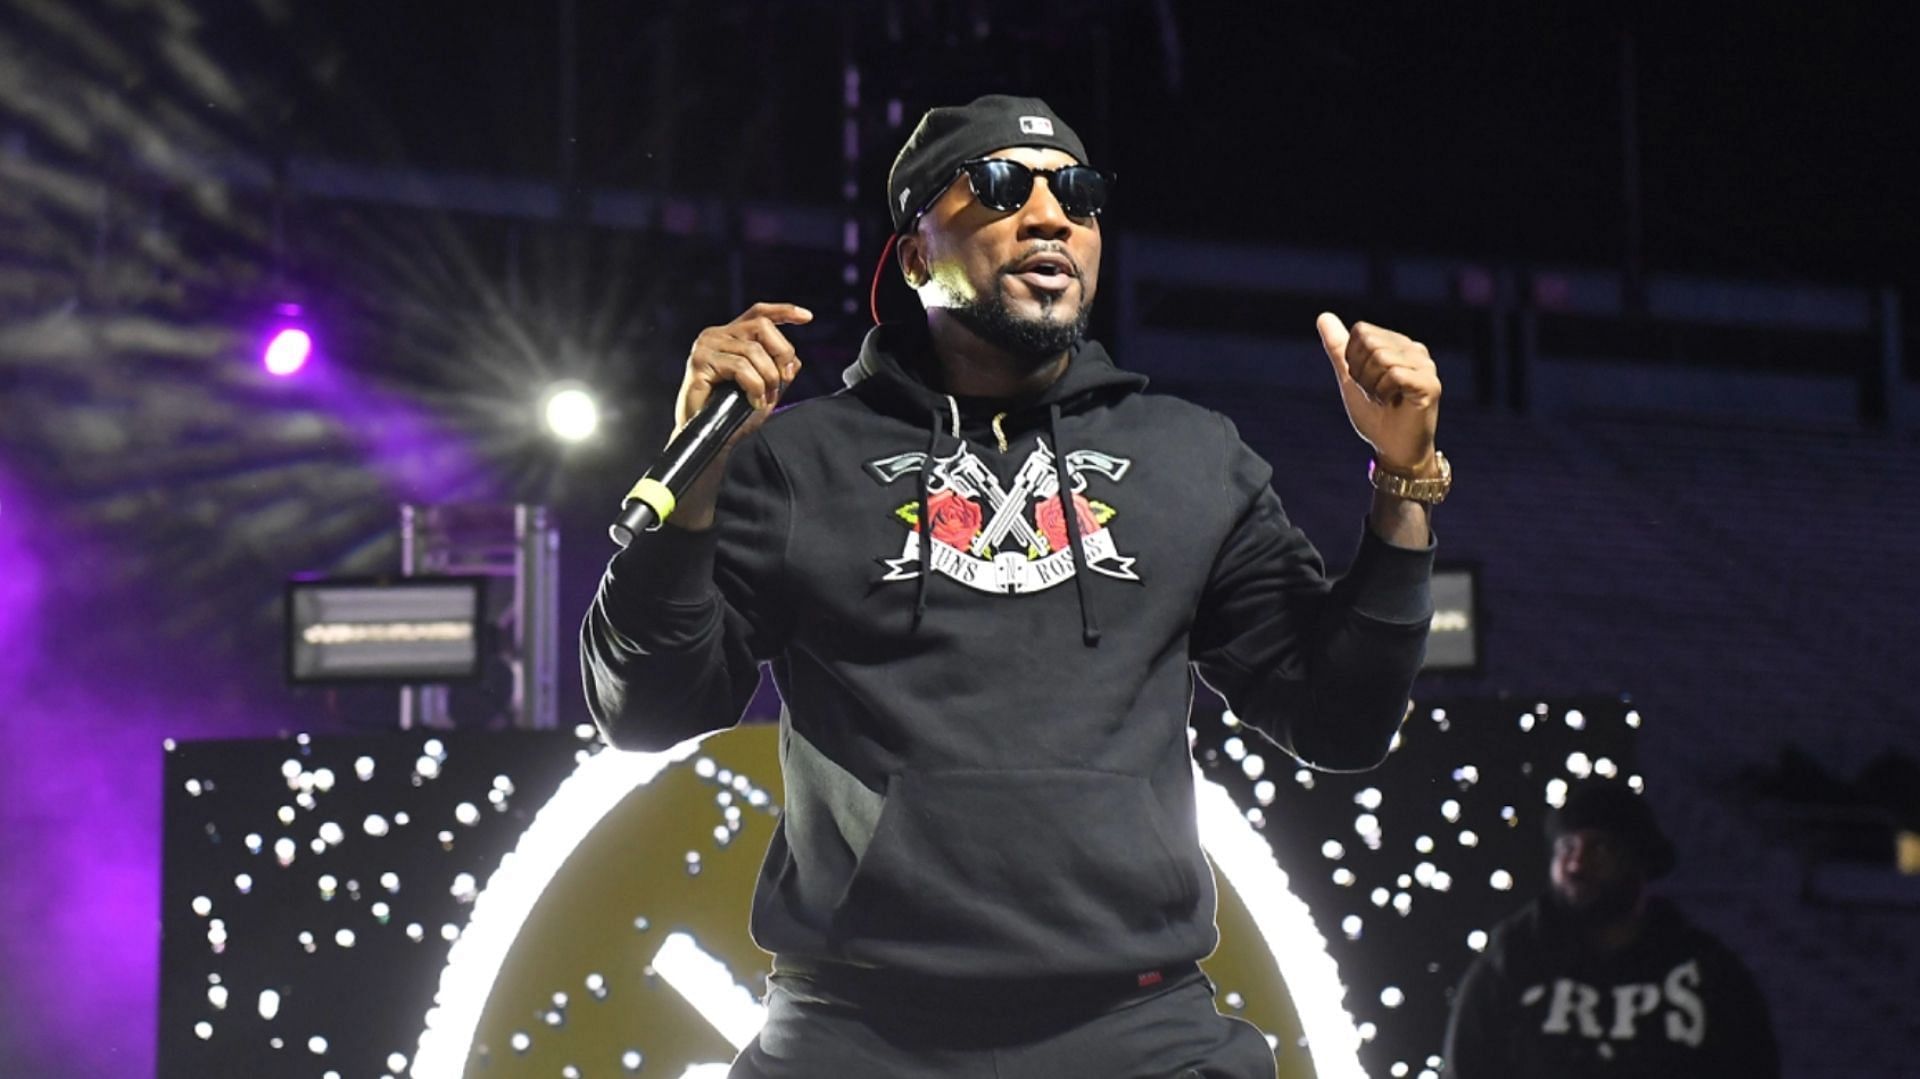 Jeezy is among the headliners this year. (Image Paras Griffin / Getty Images)